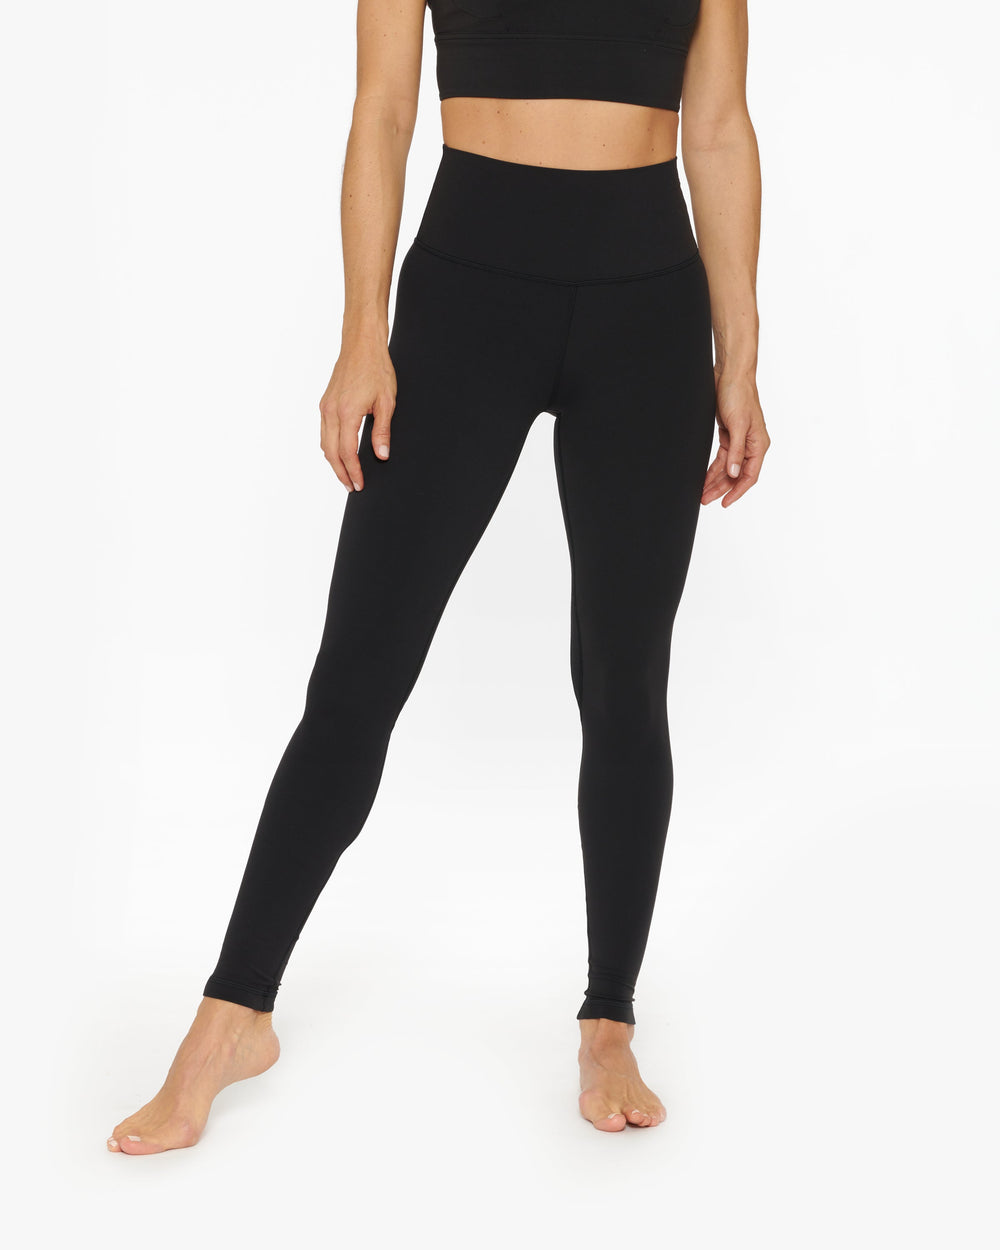 Lululemon Align High-Rise Pant 28 – The Shop at Equinox